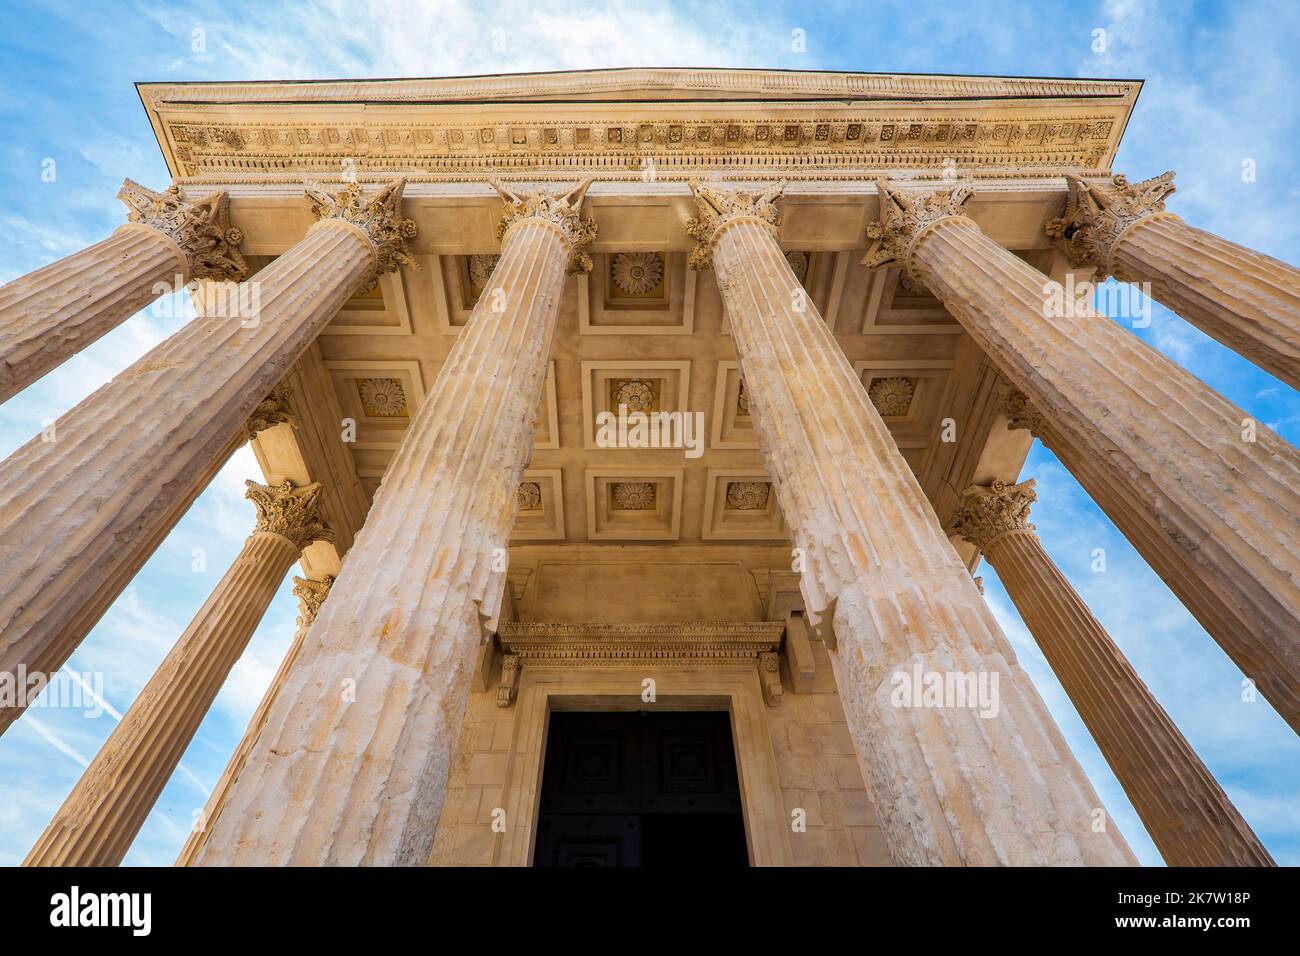 The Maison Carrée is an ancient building in Nîmes, France. The temple is believed to have been built possibly around 19BC, commissioned by Marcus Agri Stock Photo